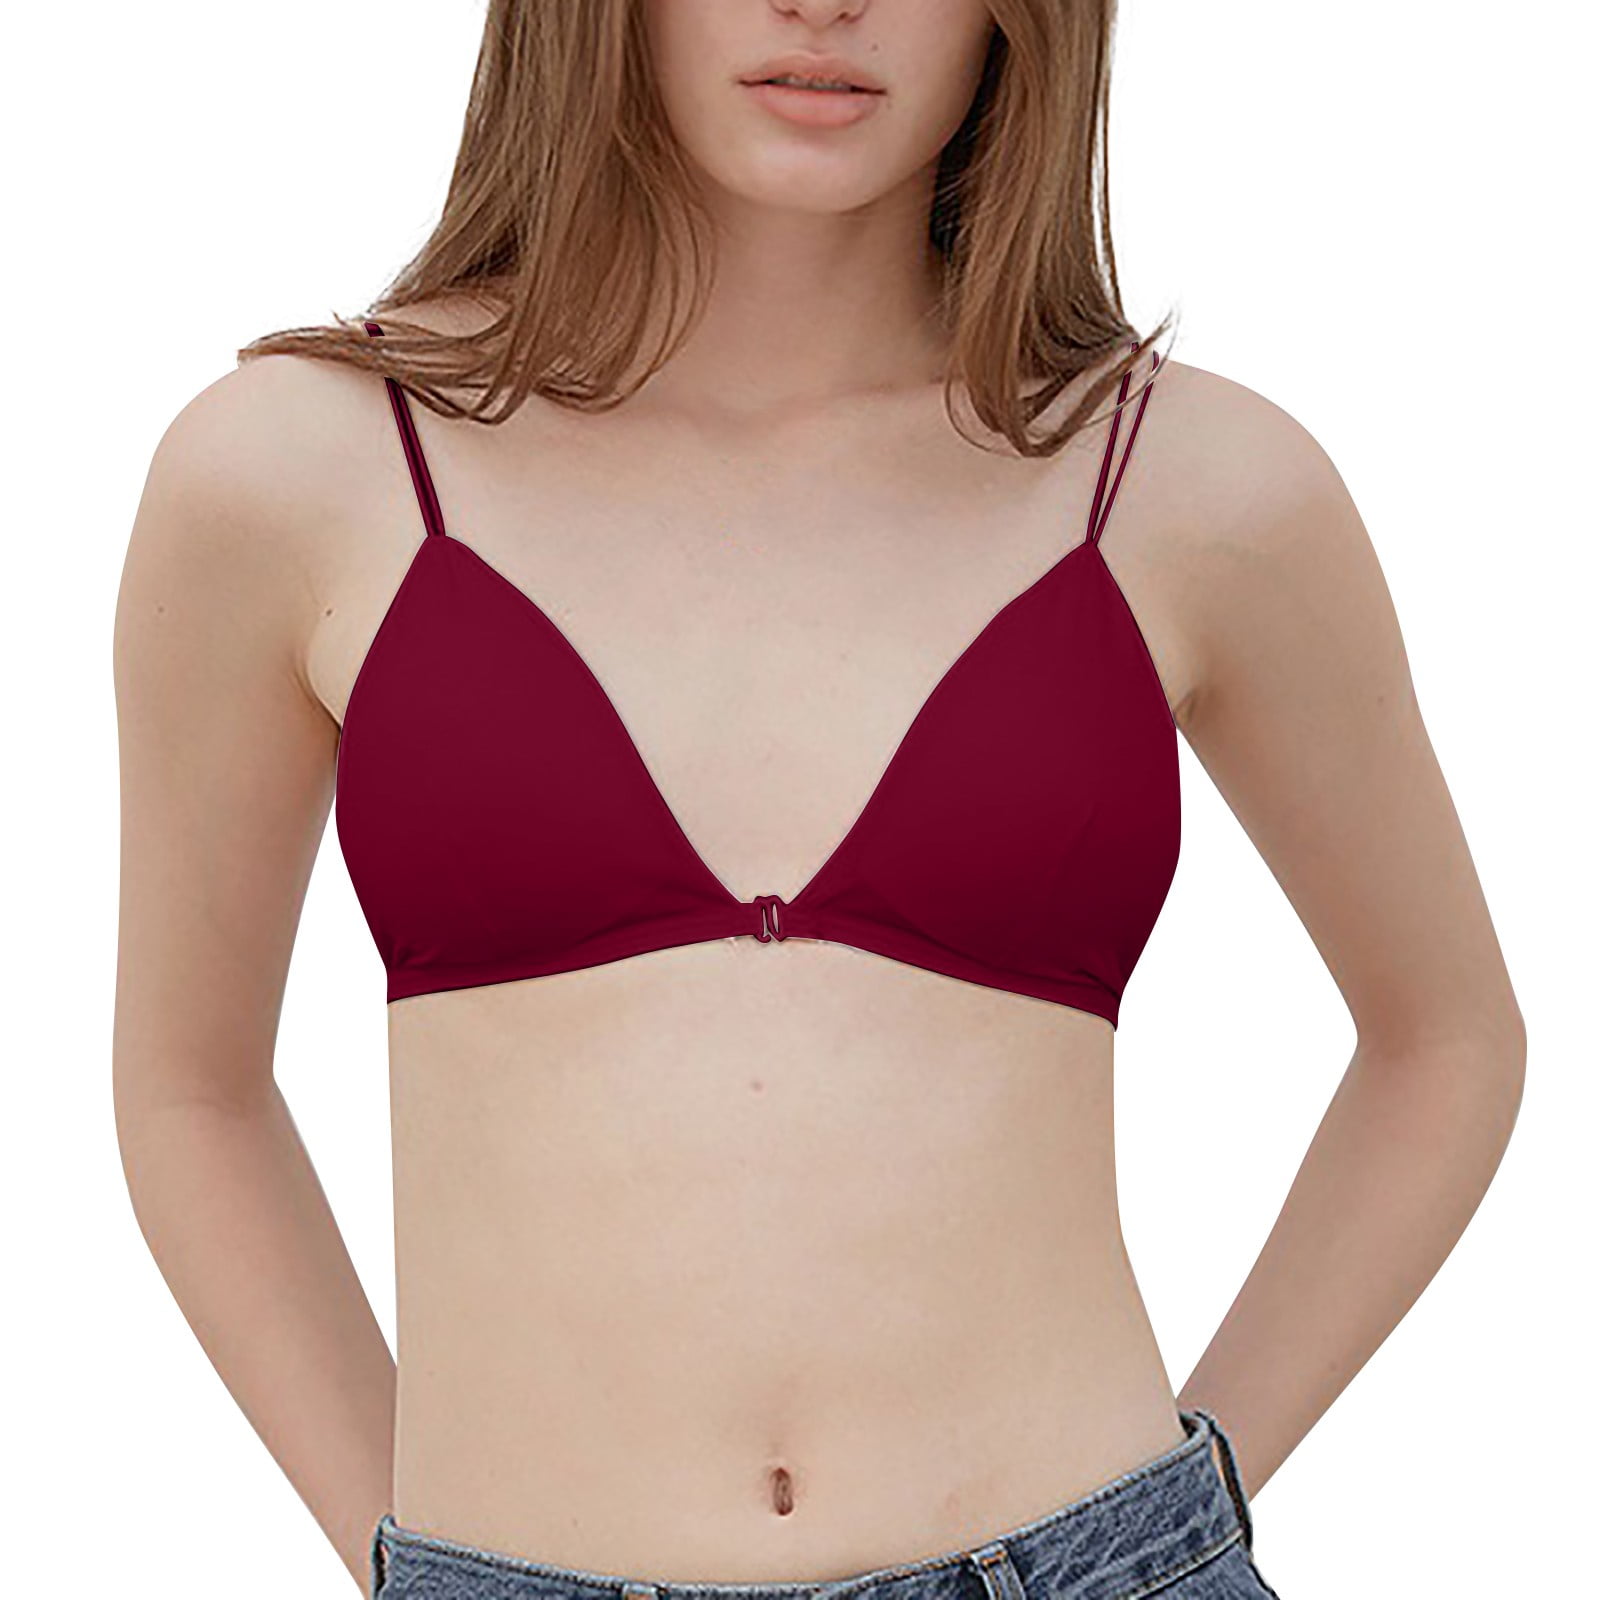 Puawkoer Bralette For Women Girls Teens Low Support Triangle V